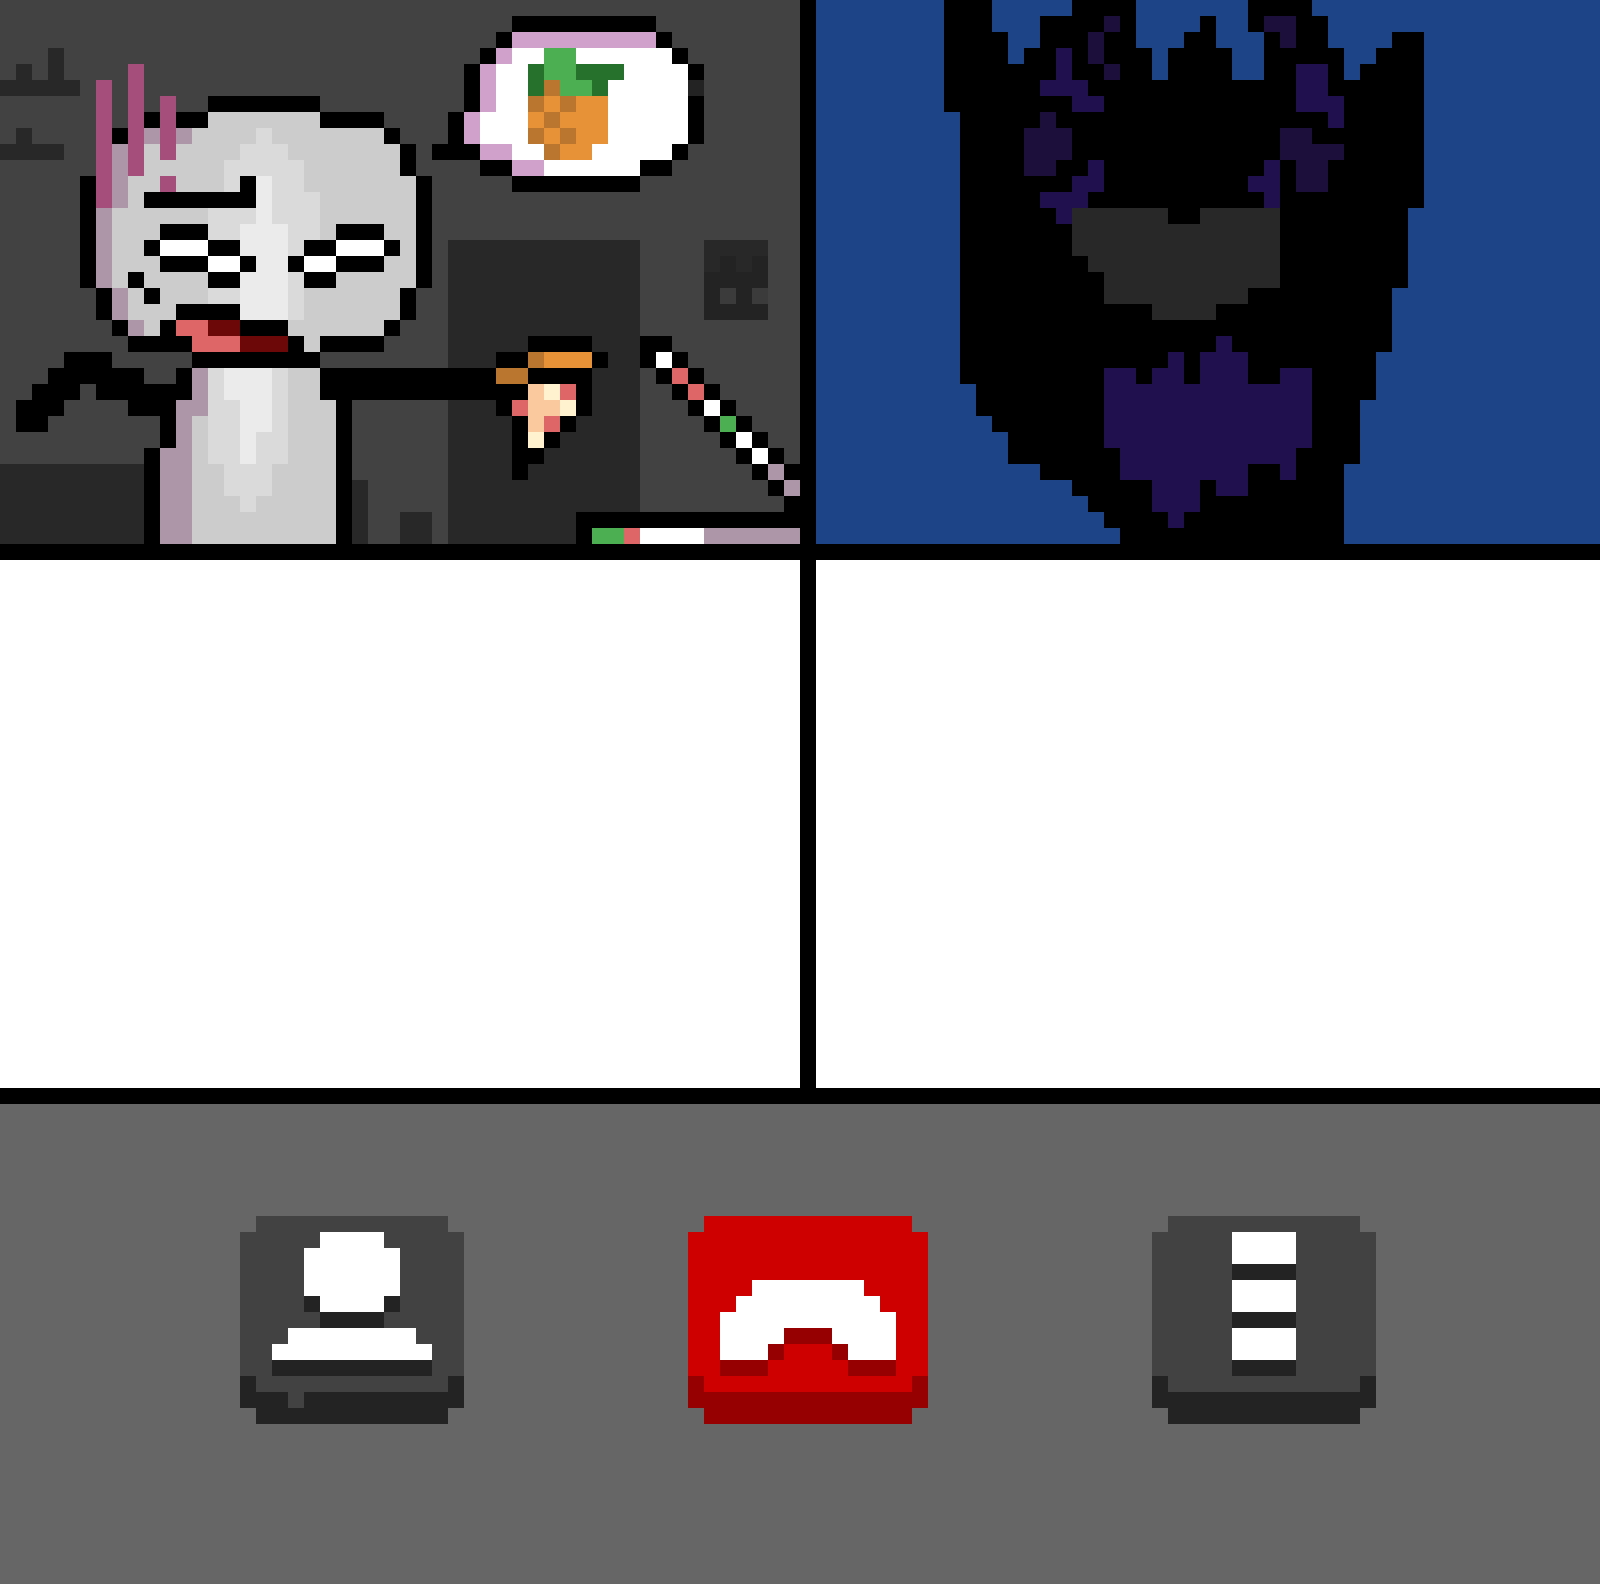 manguito767-video-call-challenge-demon-tom-eddsworld-joined-the-chat